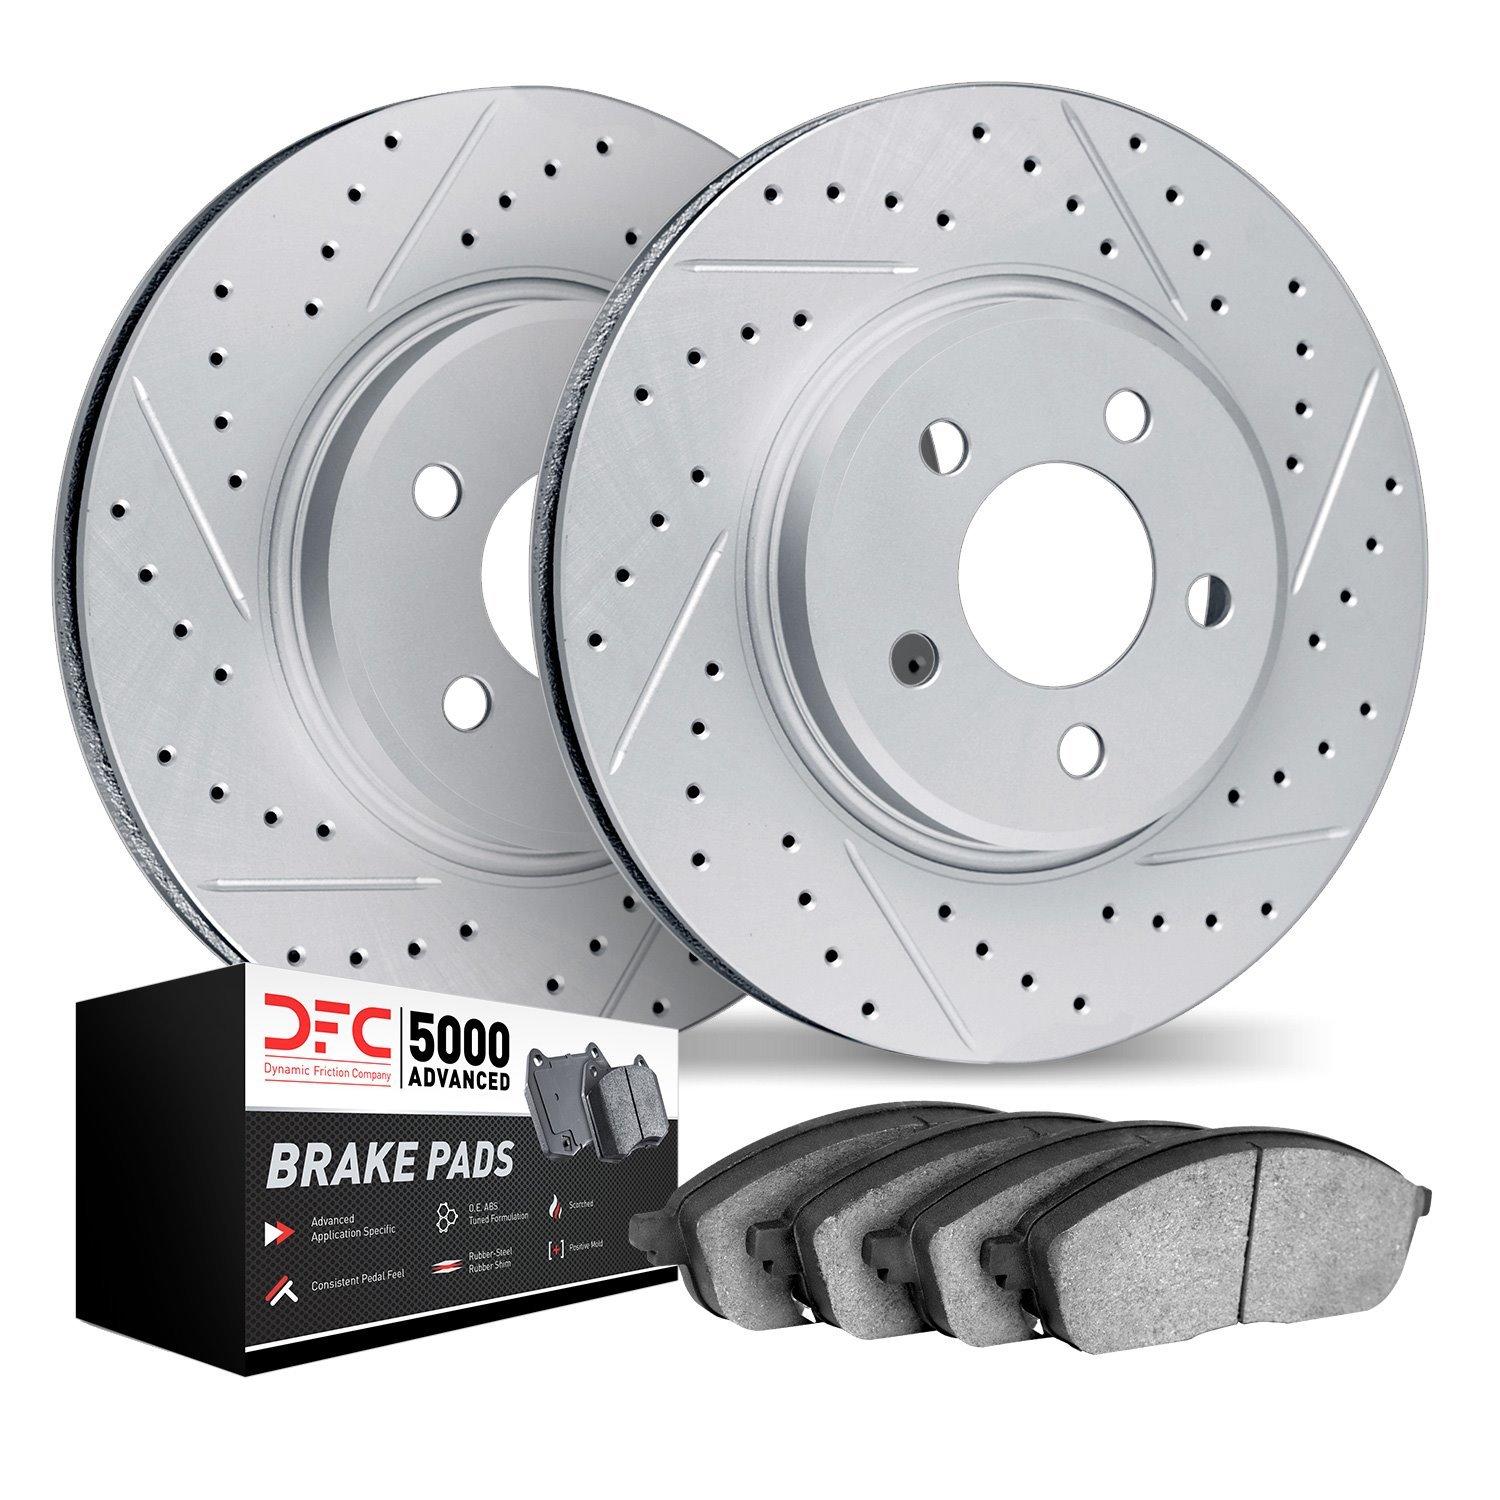 2502-46054 Geoperformance Drilled/Slotted Rotors w/5000 Advanced Brake Pads Kit, 2016-2019 GM, Position: Front